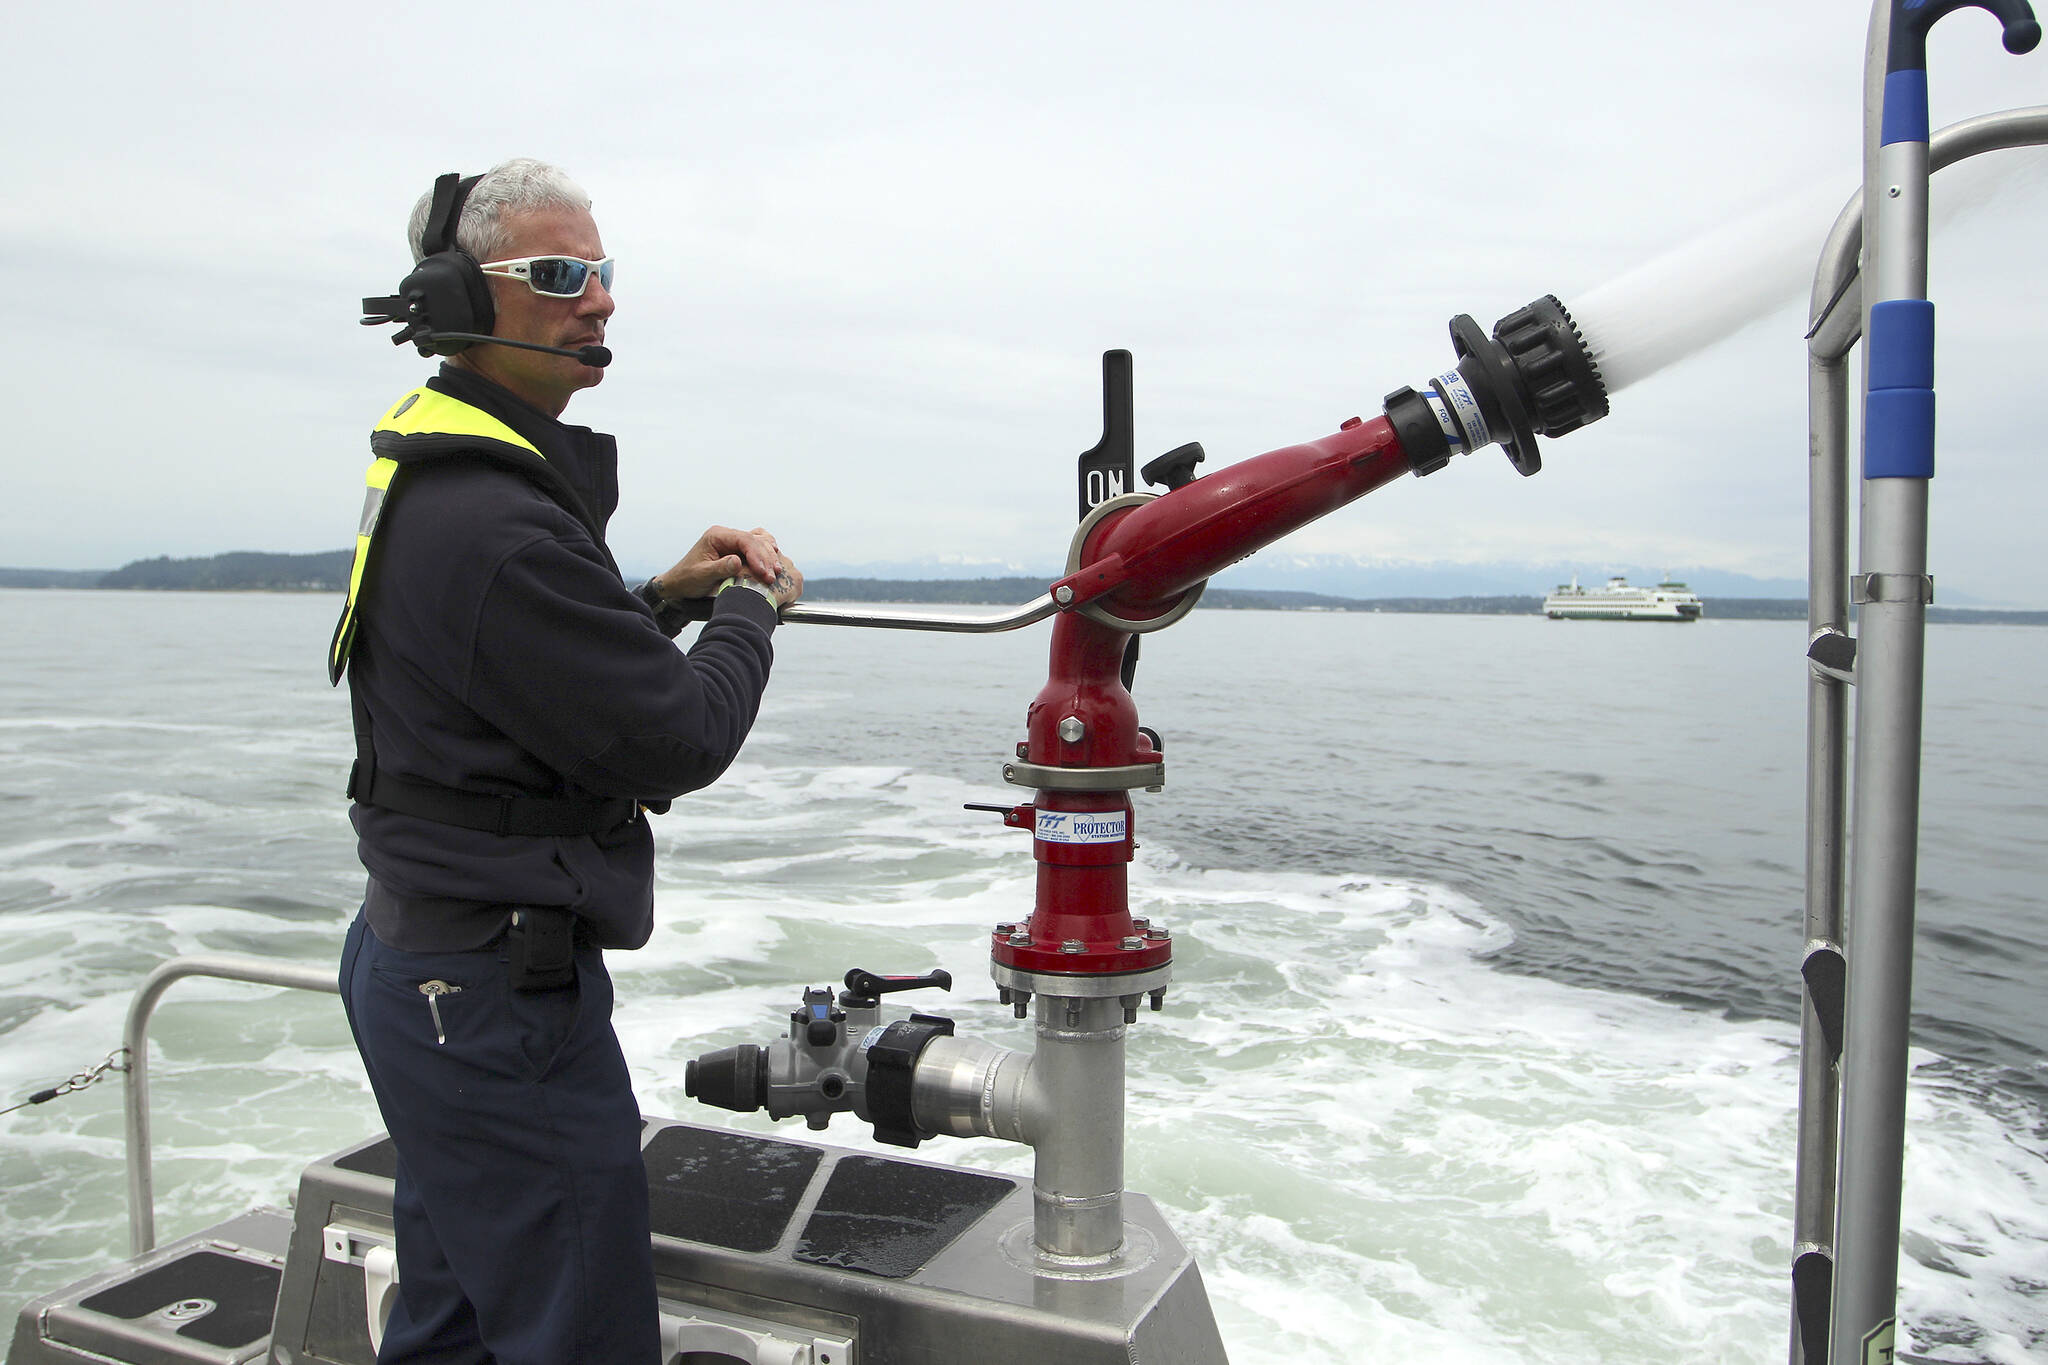 South King Fire’s Merrick McGinnis demonstrates the water canon on fire boat “Zenith” on May 26. (Olivia Sullivan/the Mirror)